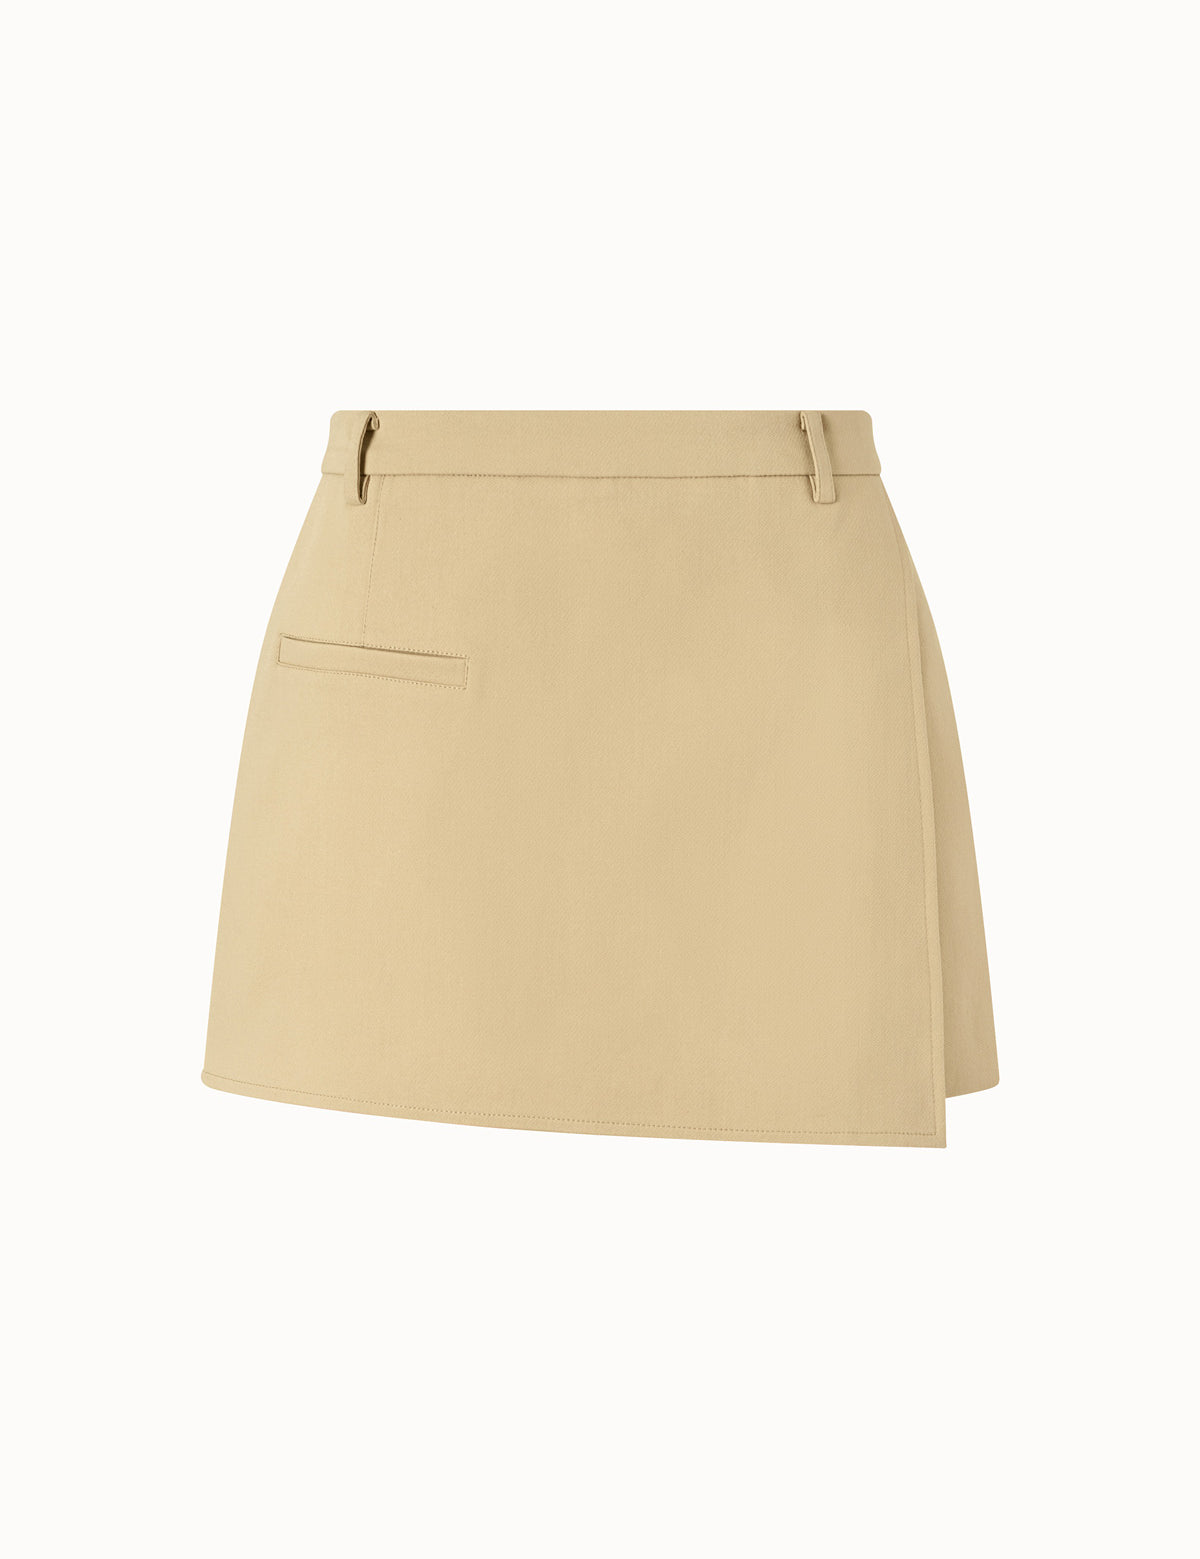 low-rise_wrap_culottes_be_09.jpg